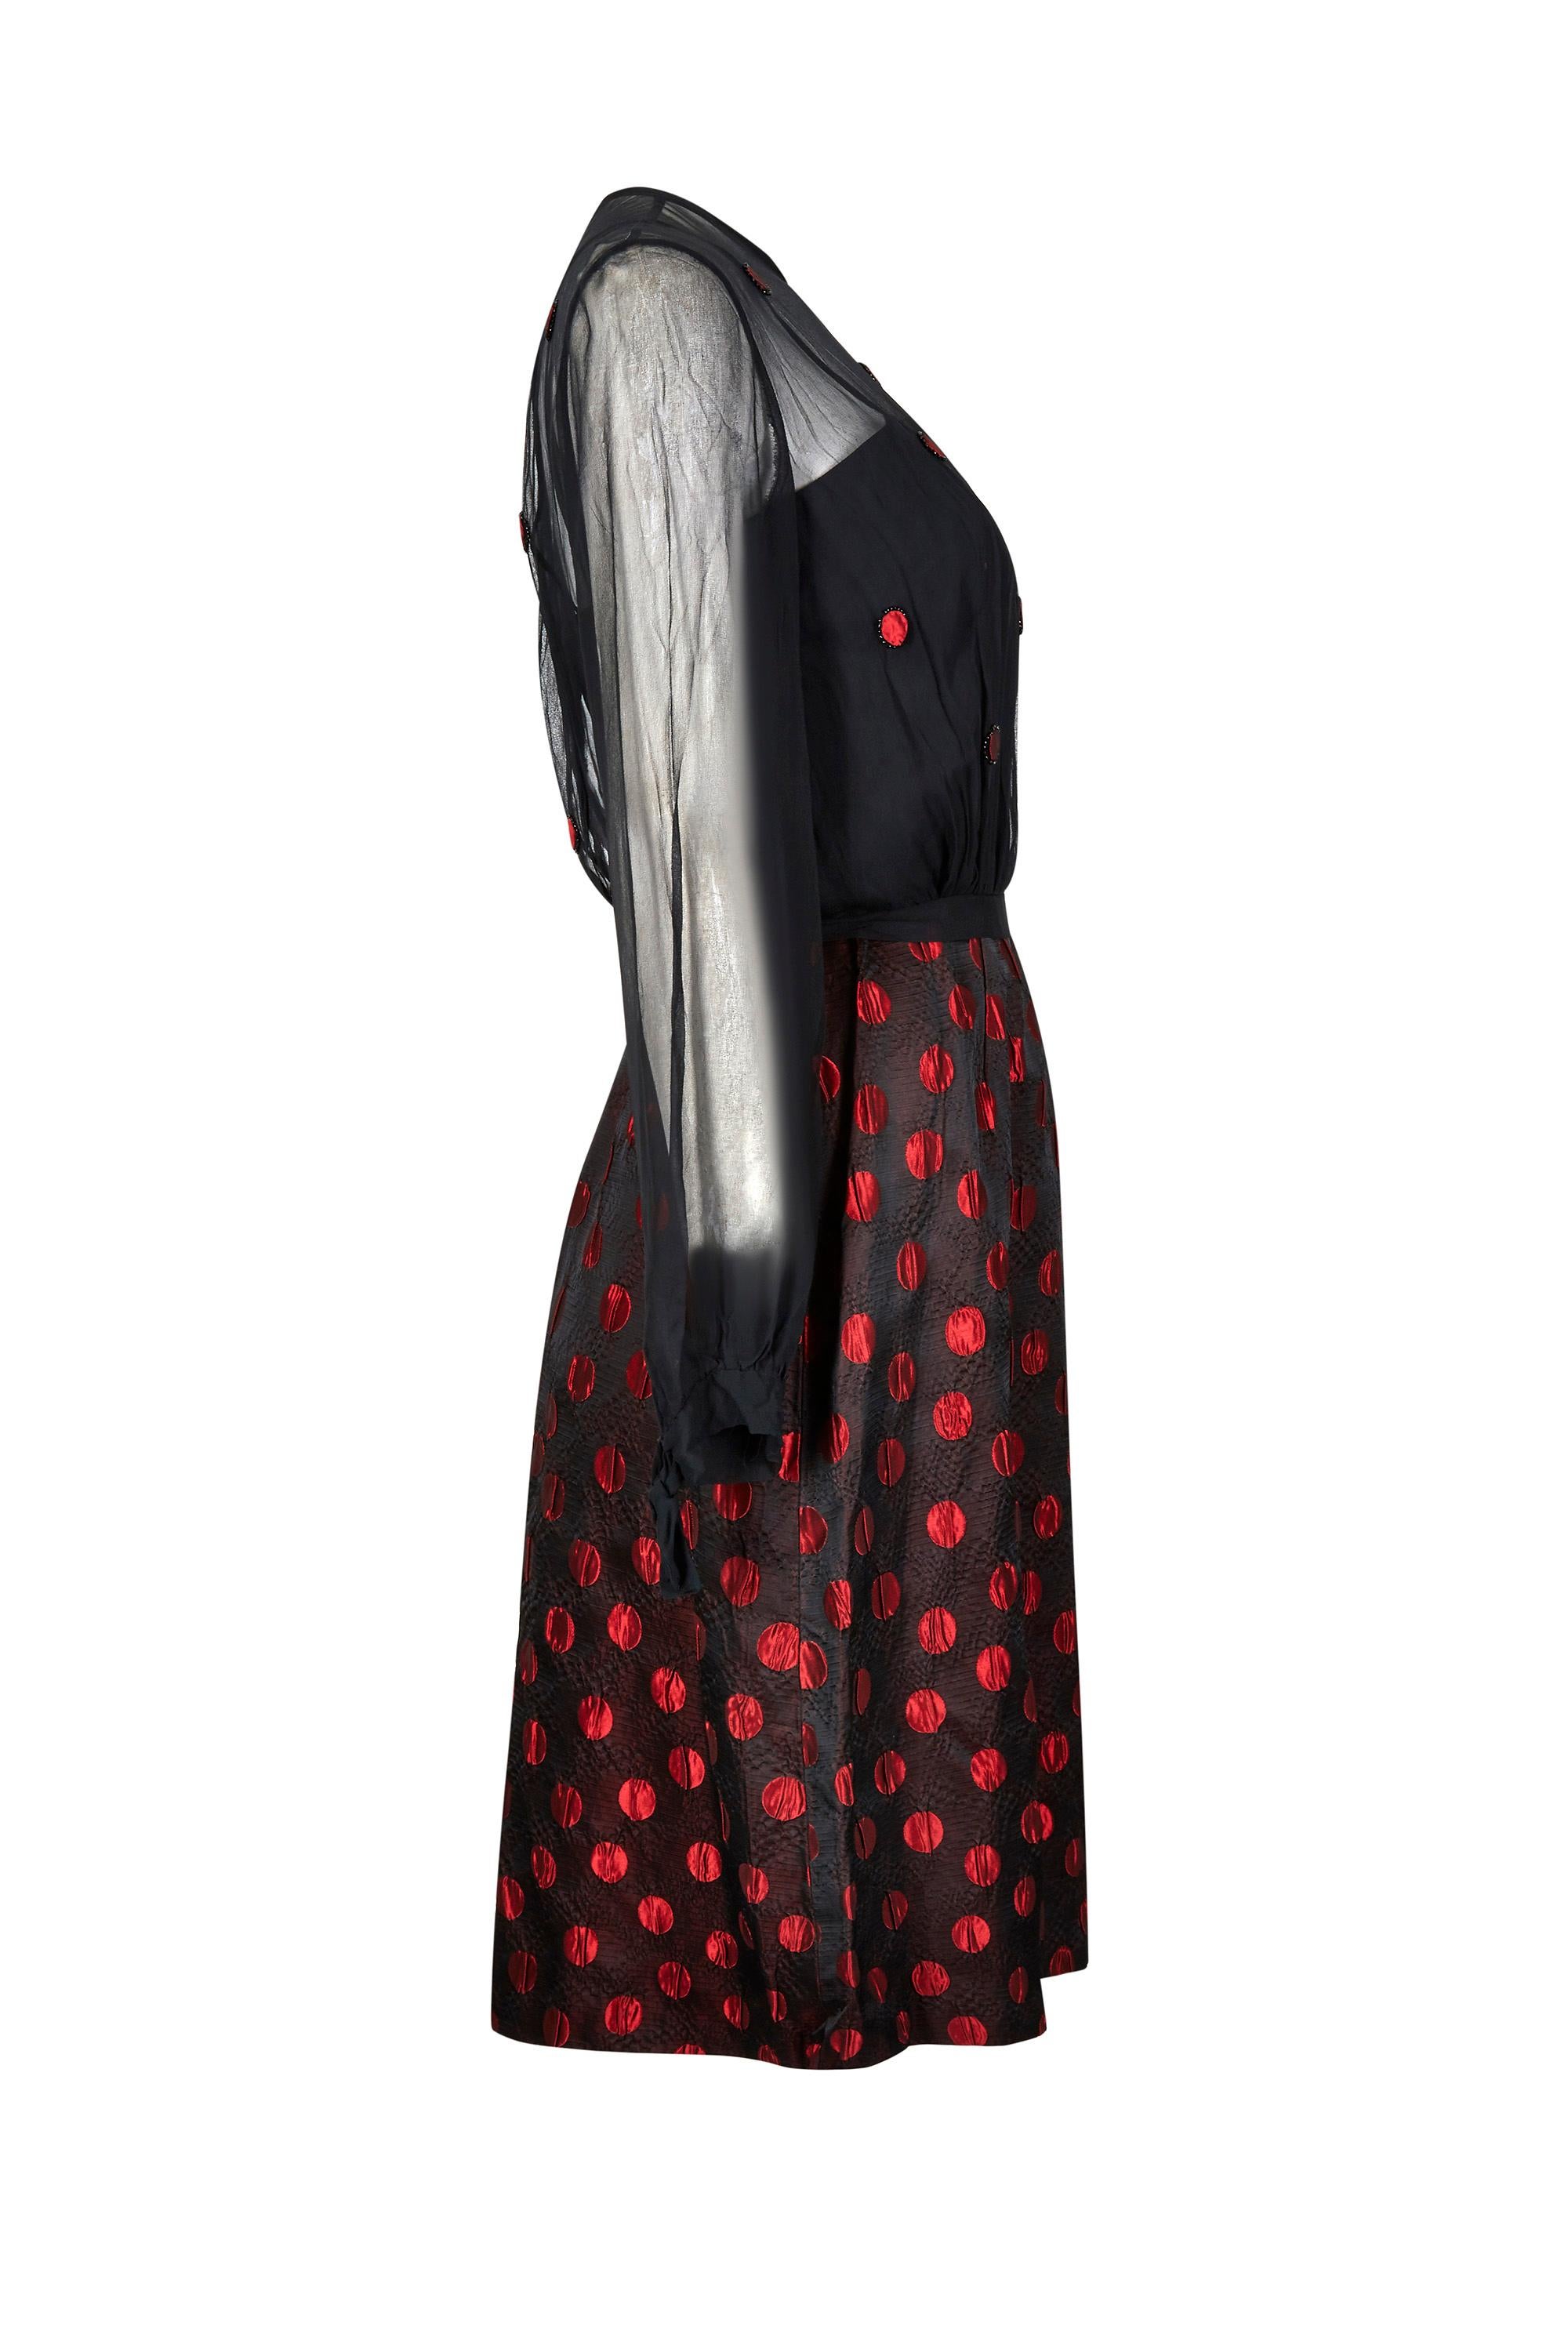 This 1960s red and black polka dot American demi-couture ensemble is in beautiful vintage condition and of excellent quality; however, is unlabelled and so the designer remains unknown. The set is comprised of a dress and jacket in chiffon and silk